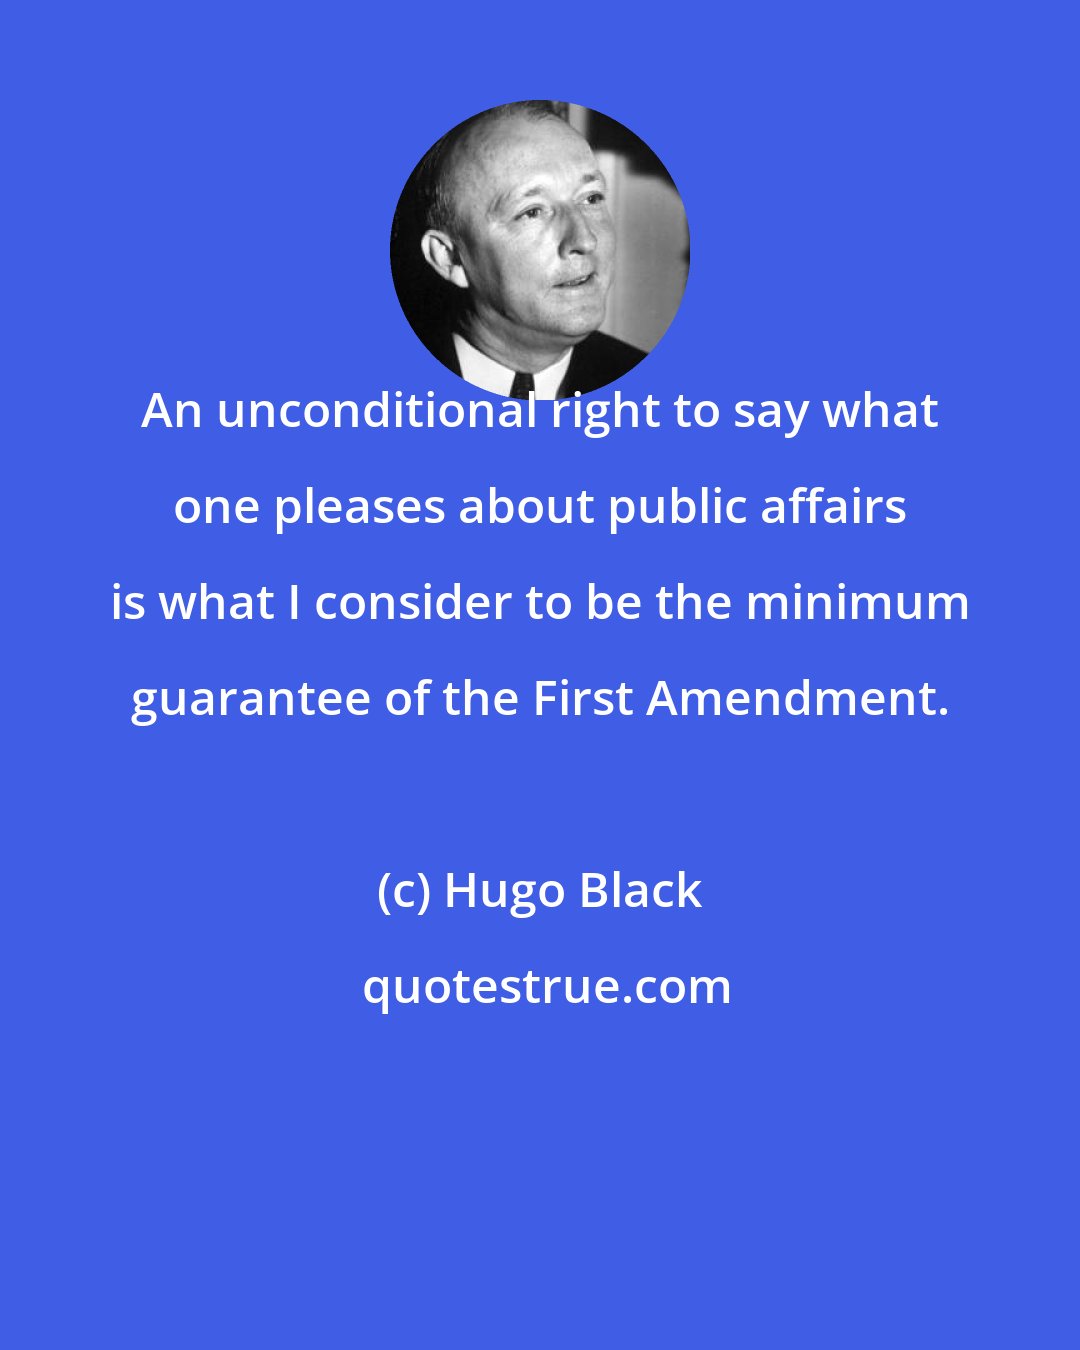 Hugo Black: An unconditional right to say what one pleases about public affairs is what I consider to be the minimum guarantee of the First Amendment.